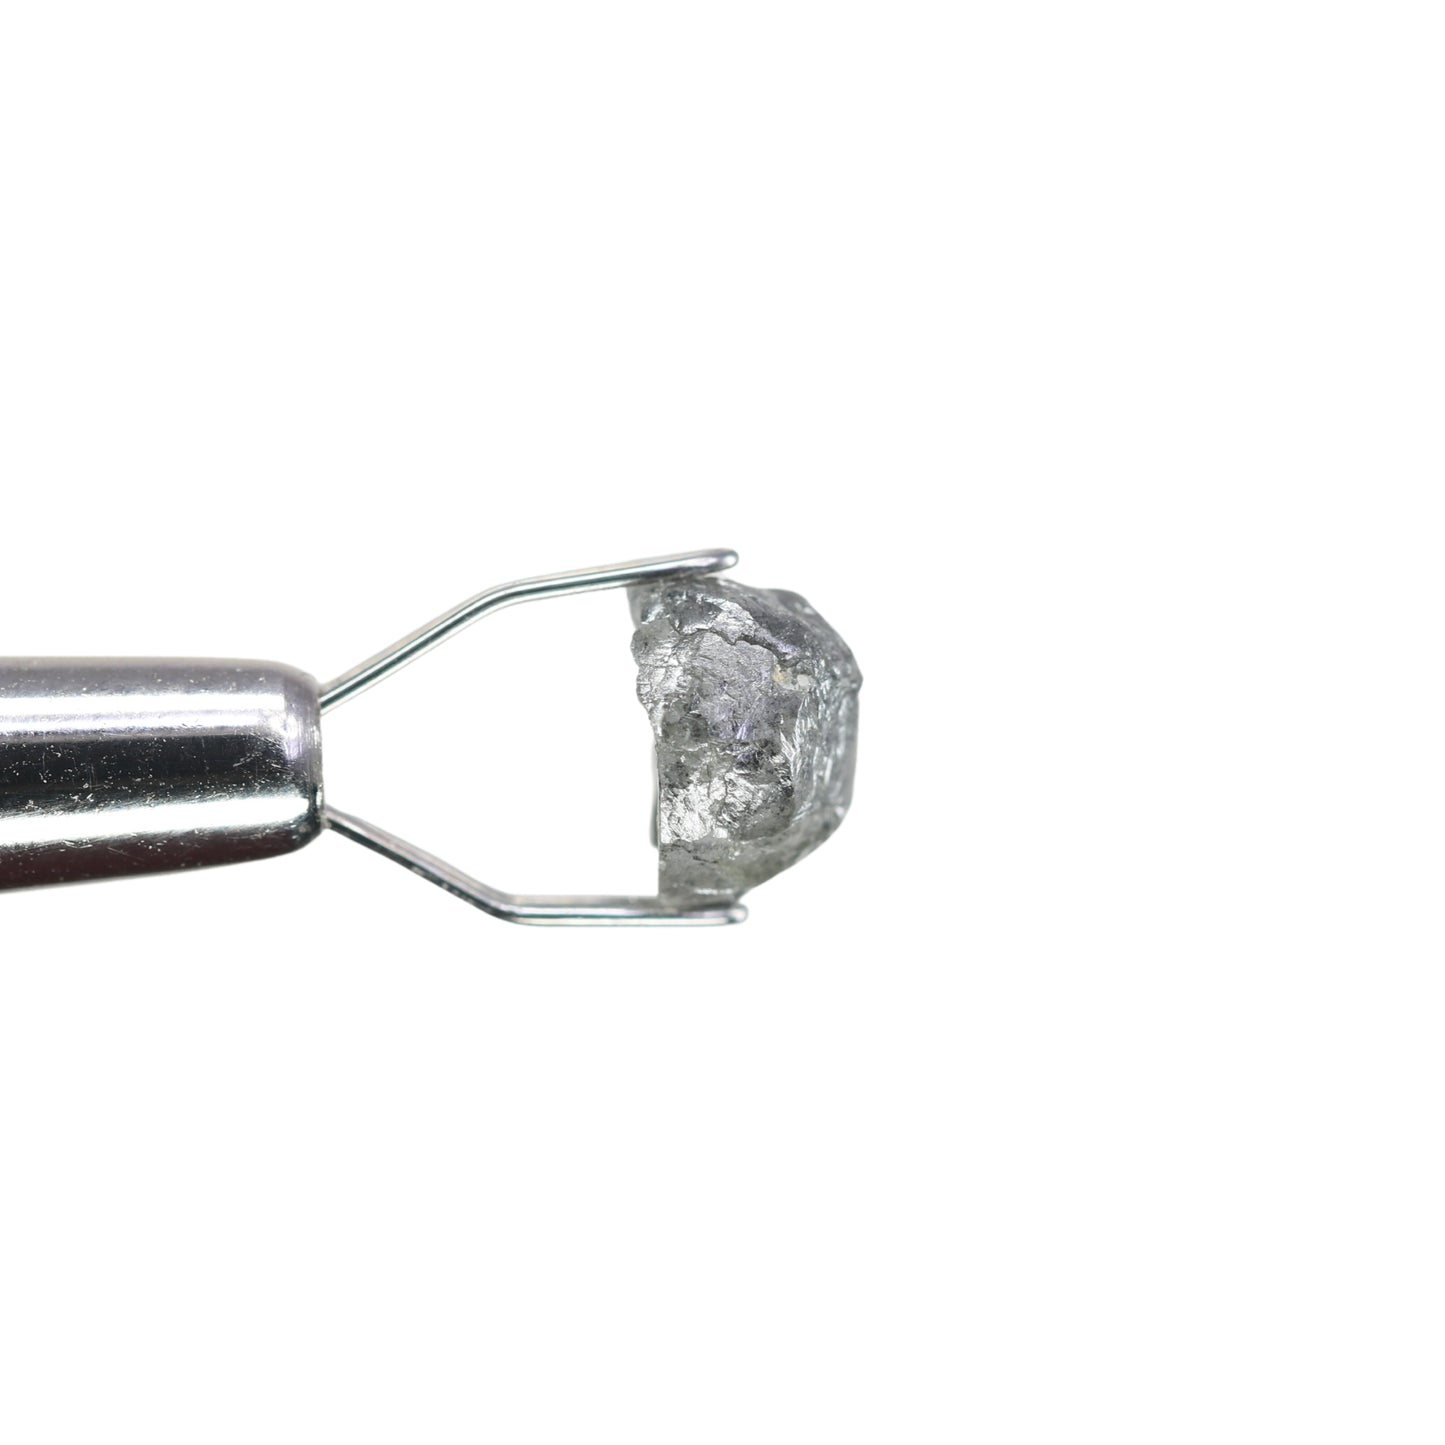 2.31 CT Salt And Pepper Rough Uncut Diamond For Wedding Ring | Engagement Ring